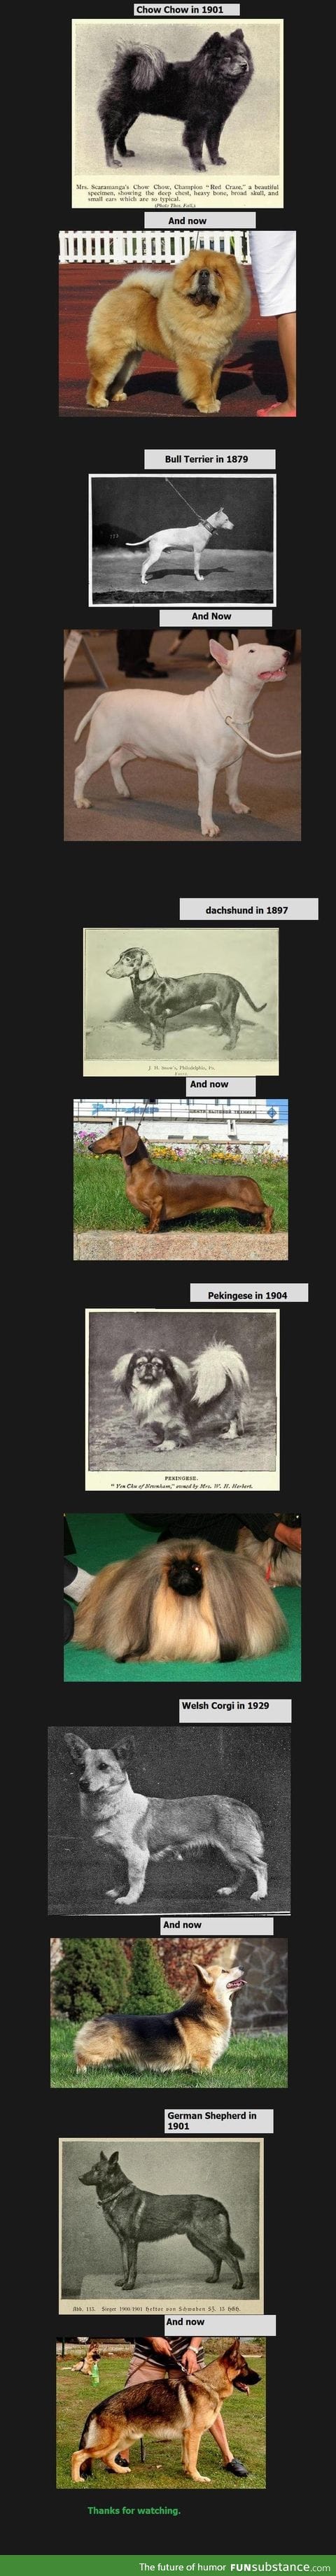 Dogs then and now